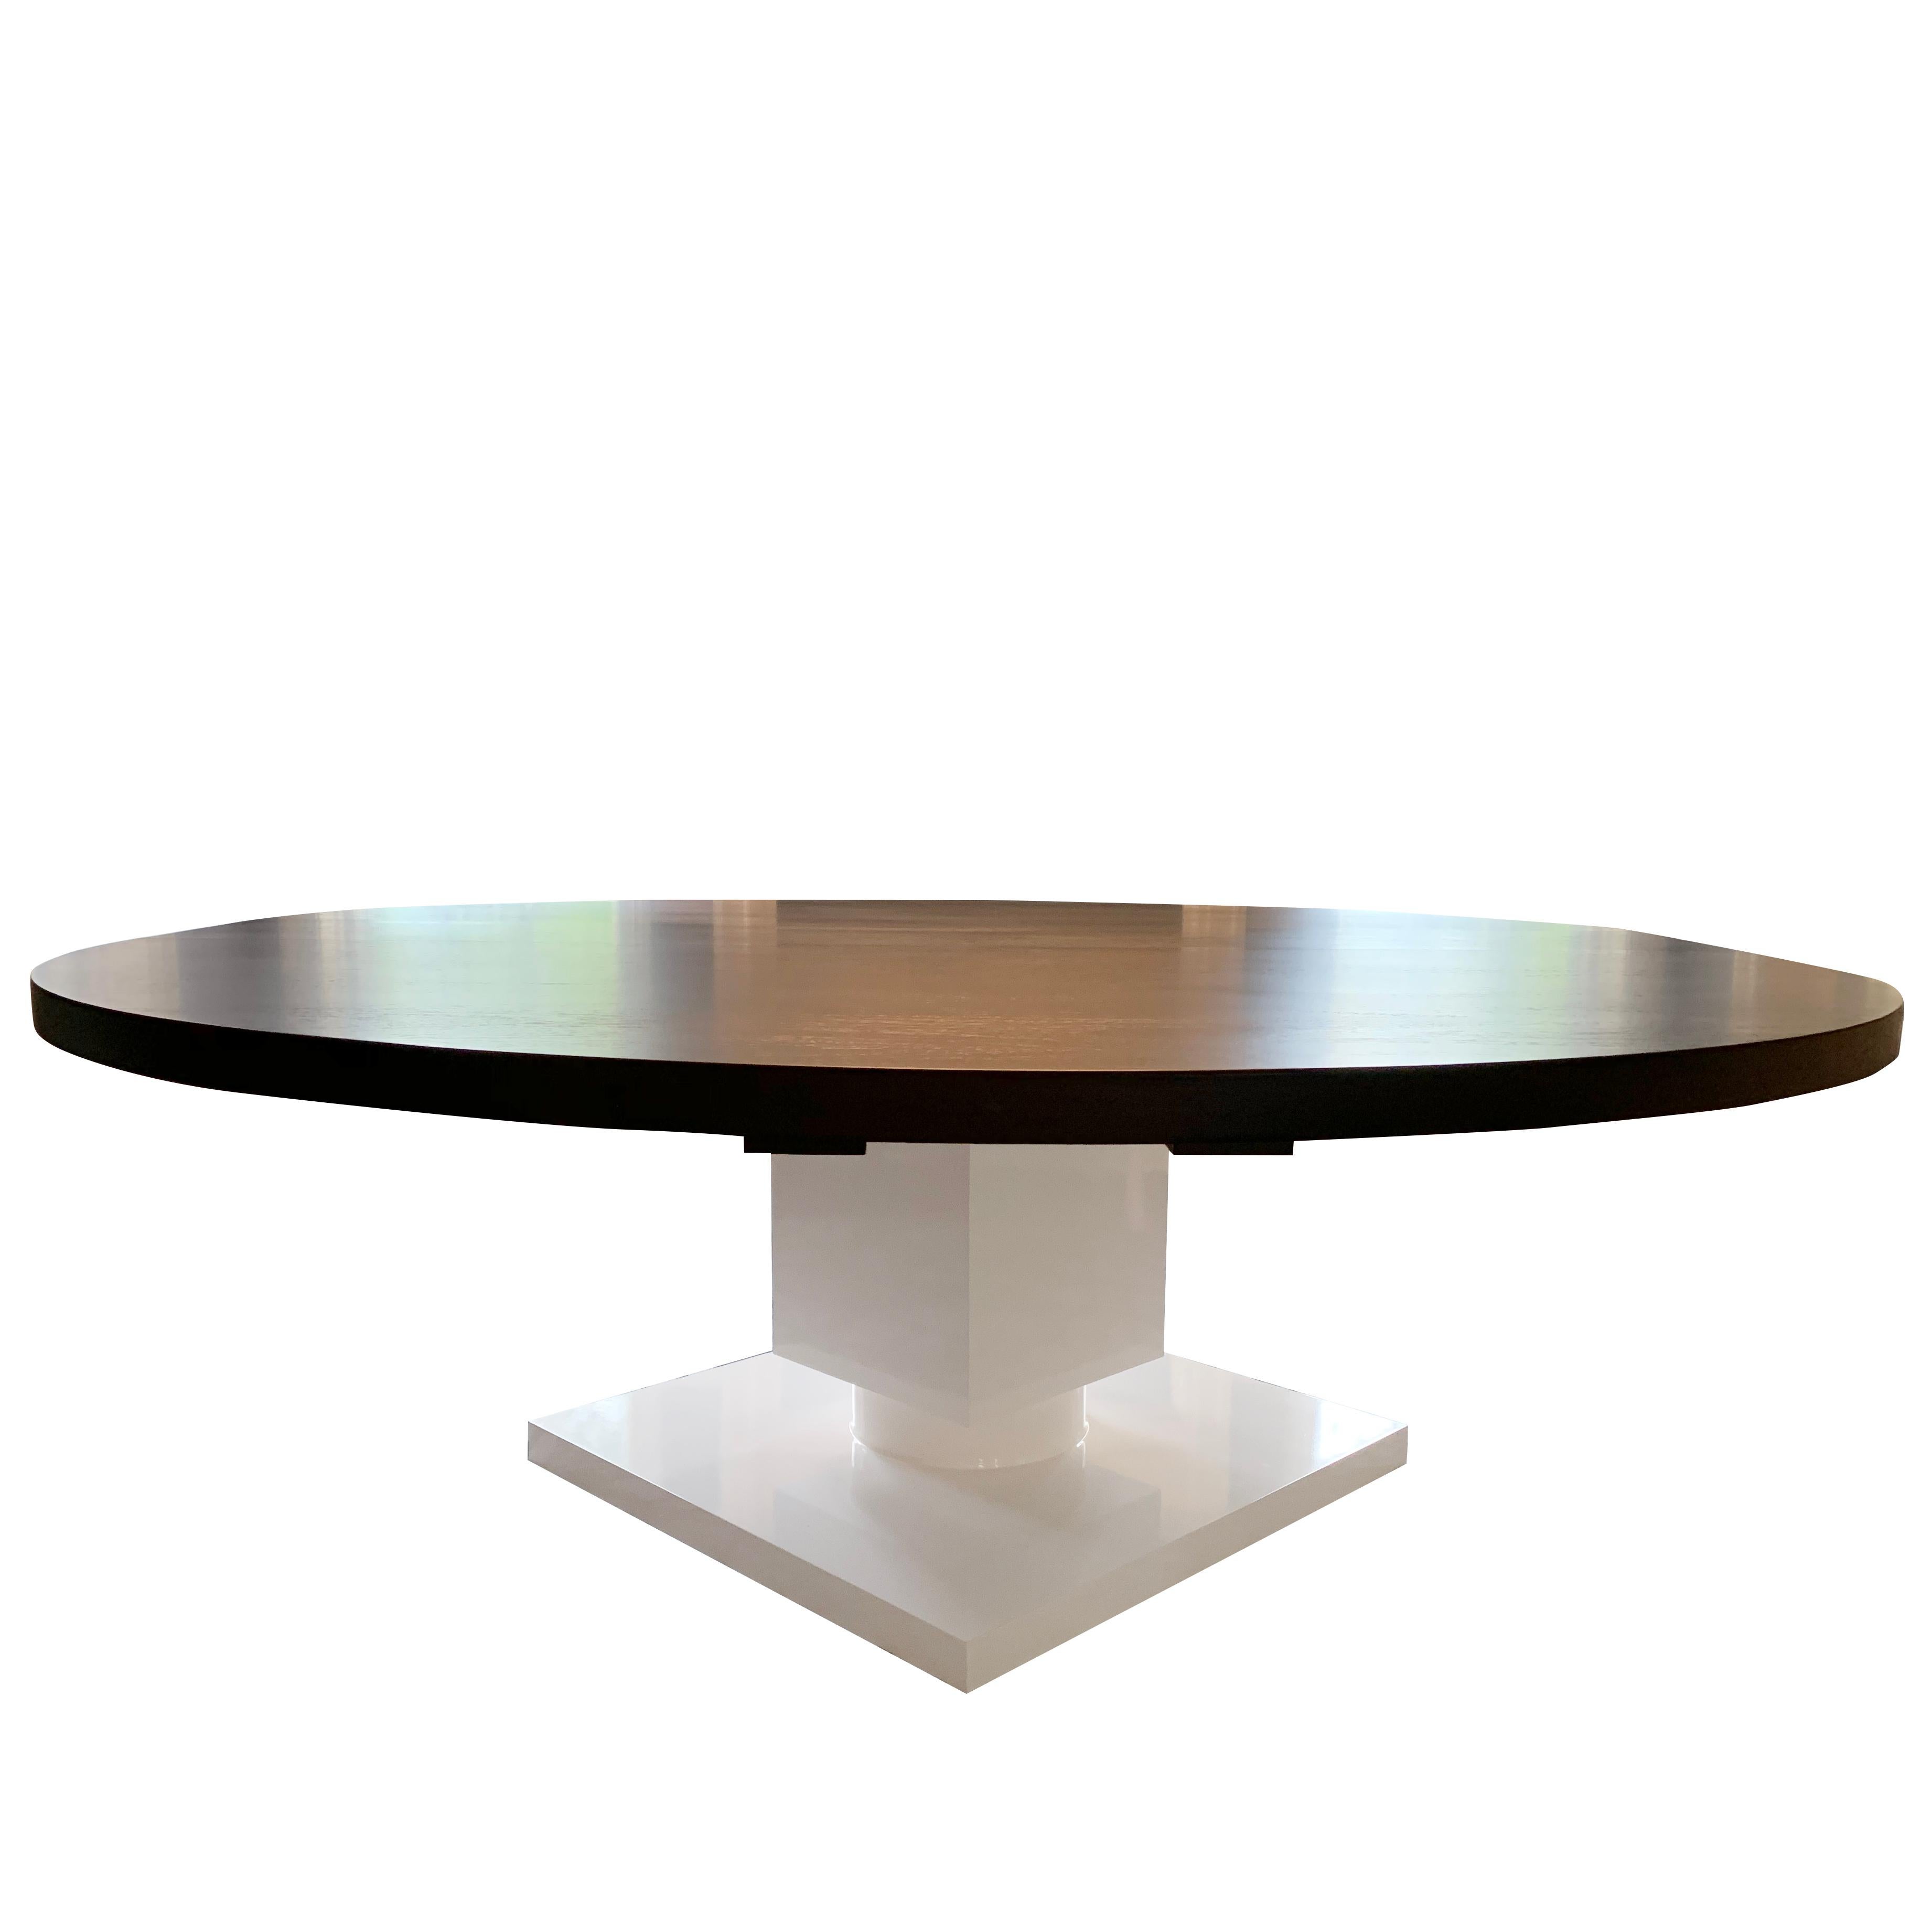 The Gabietta round dining table is our modern take on a traditional pedestal dining table. Featuring a cube shaped base lacquered in glossy white with round Wenge wood top. The table can be built with or without extension leaves.

Built order with